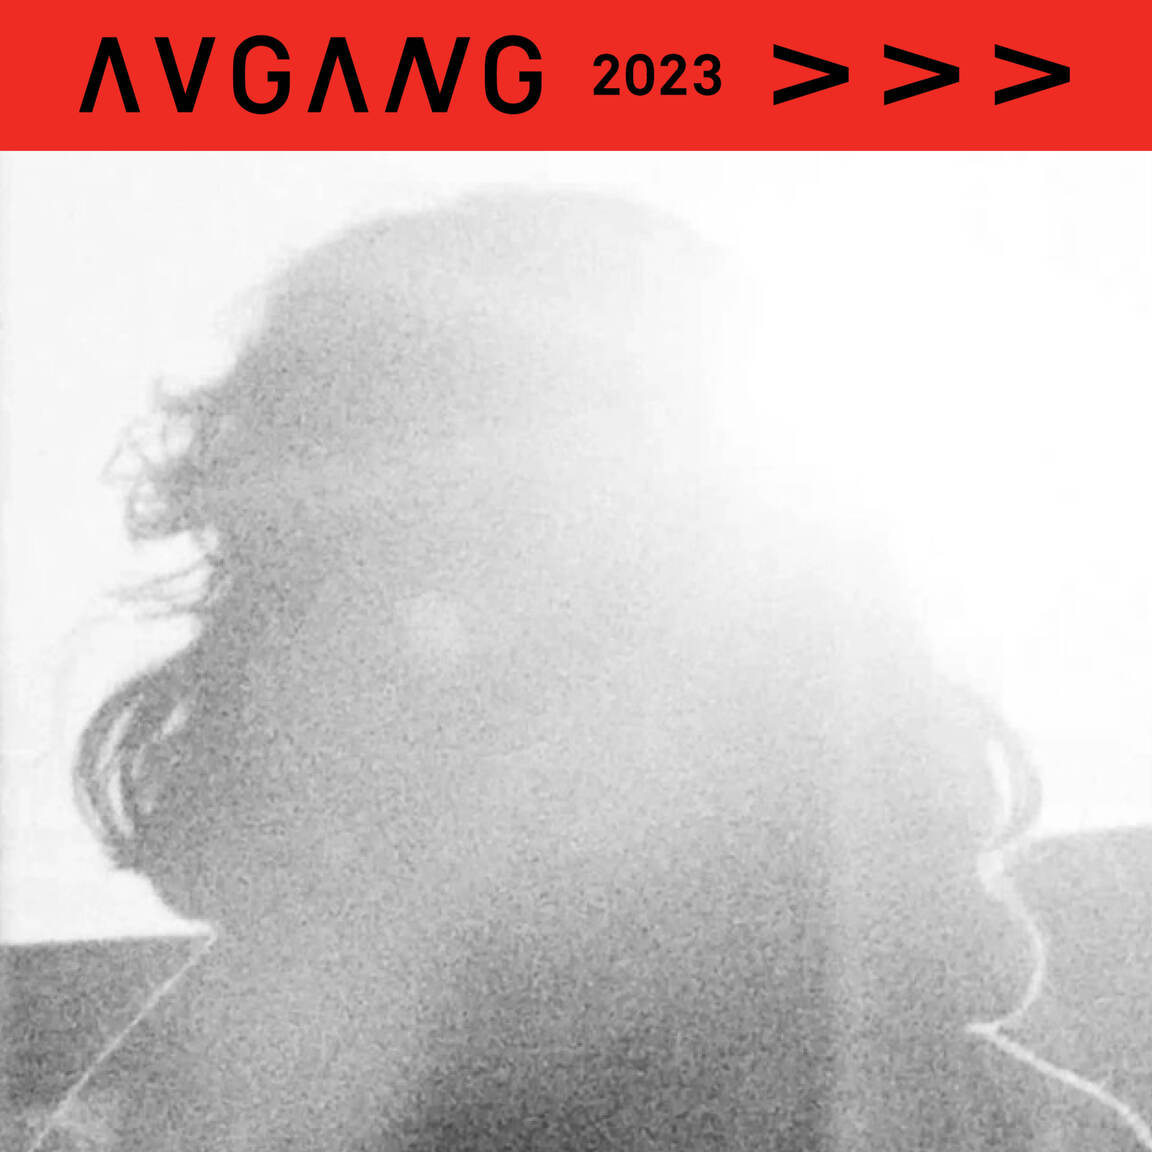 Avgang 2023: Johan Andrén / Between your eye and the other